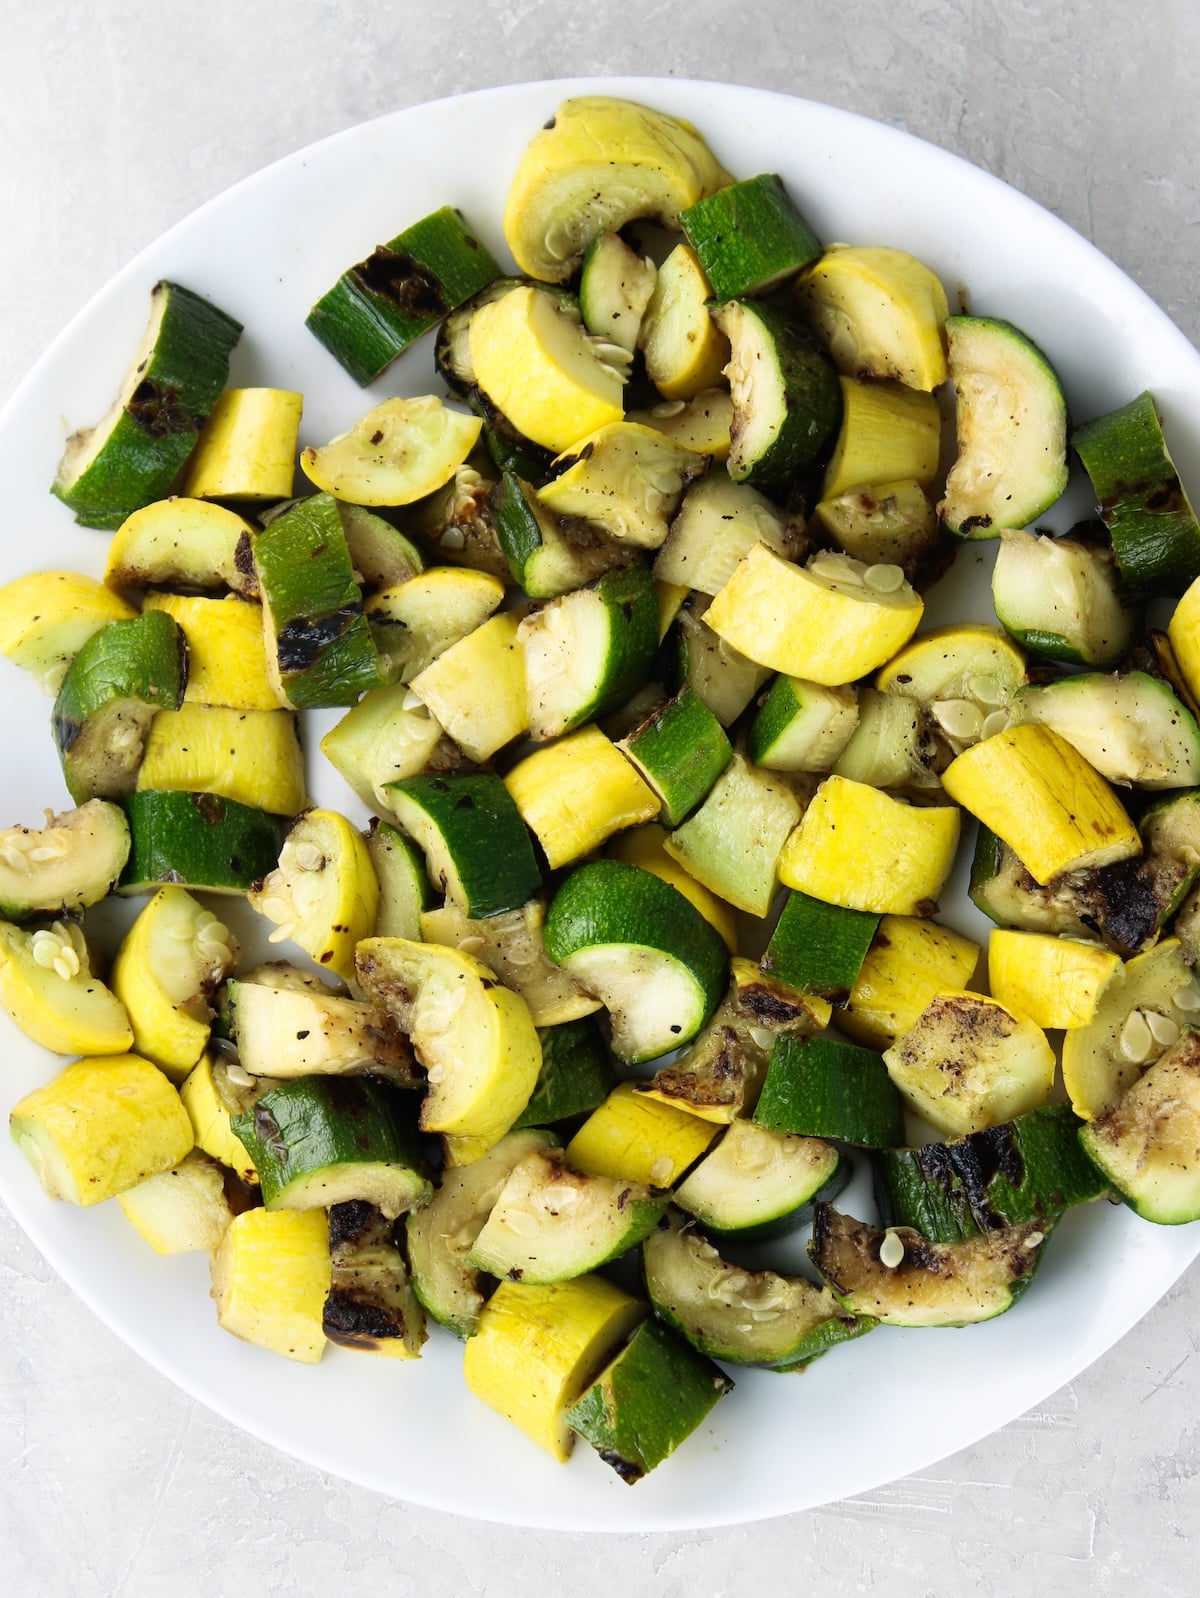 Grilled summer squash and zucchini cut up.